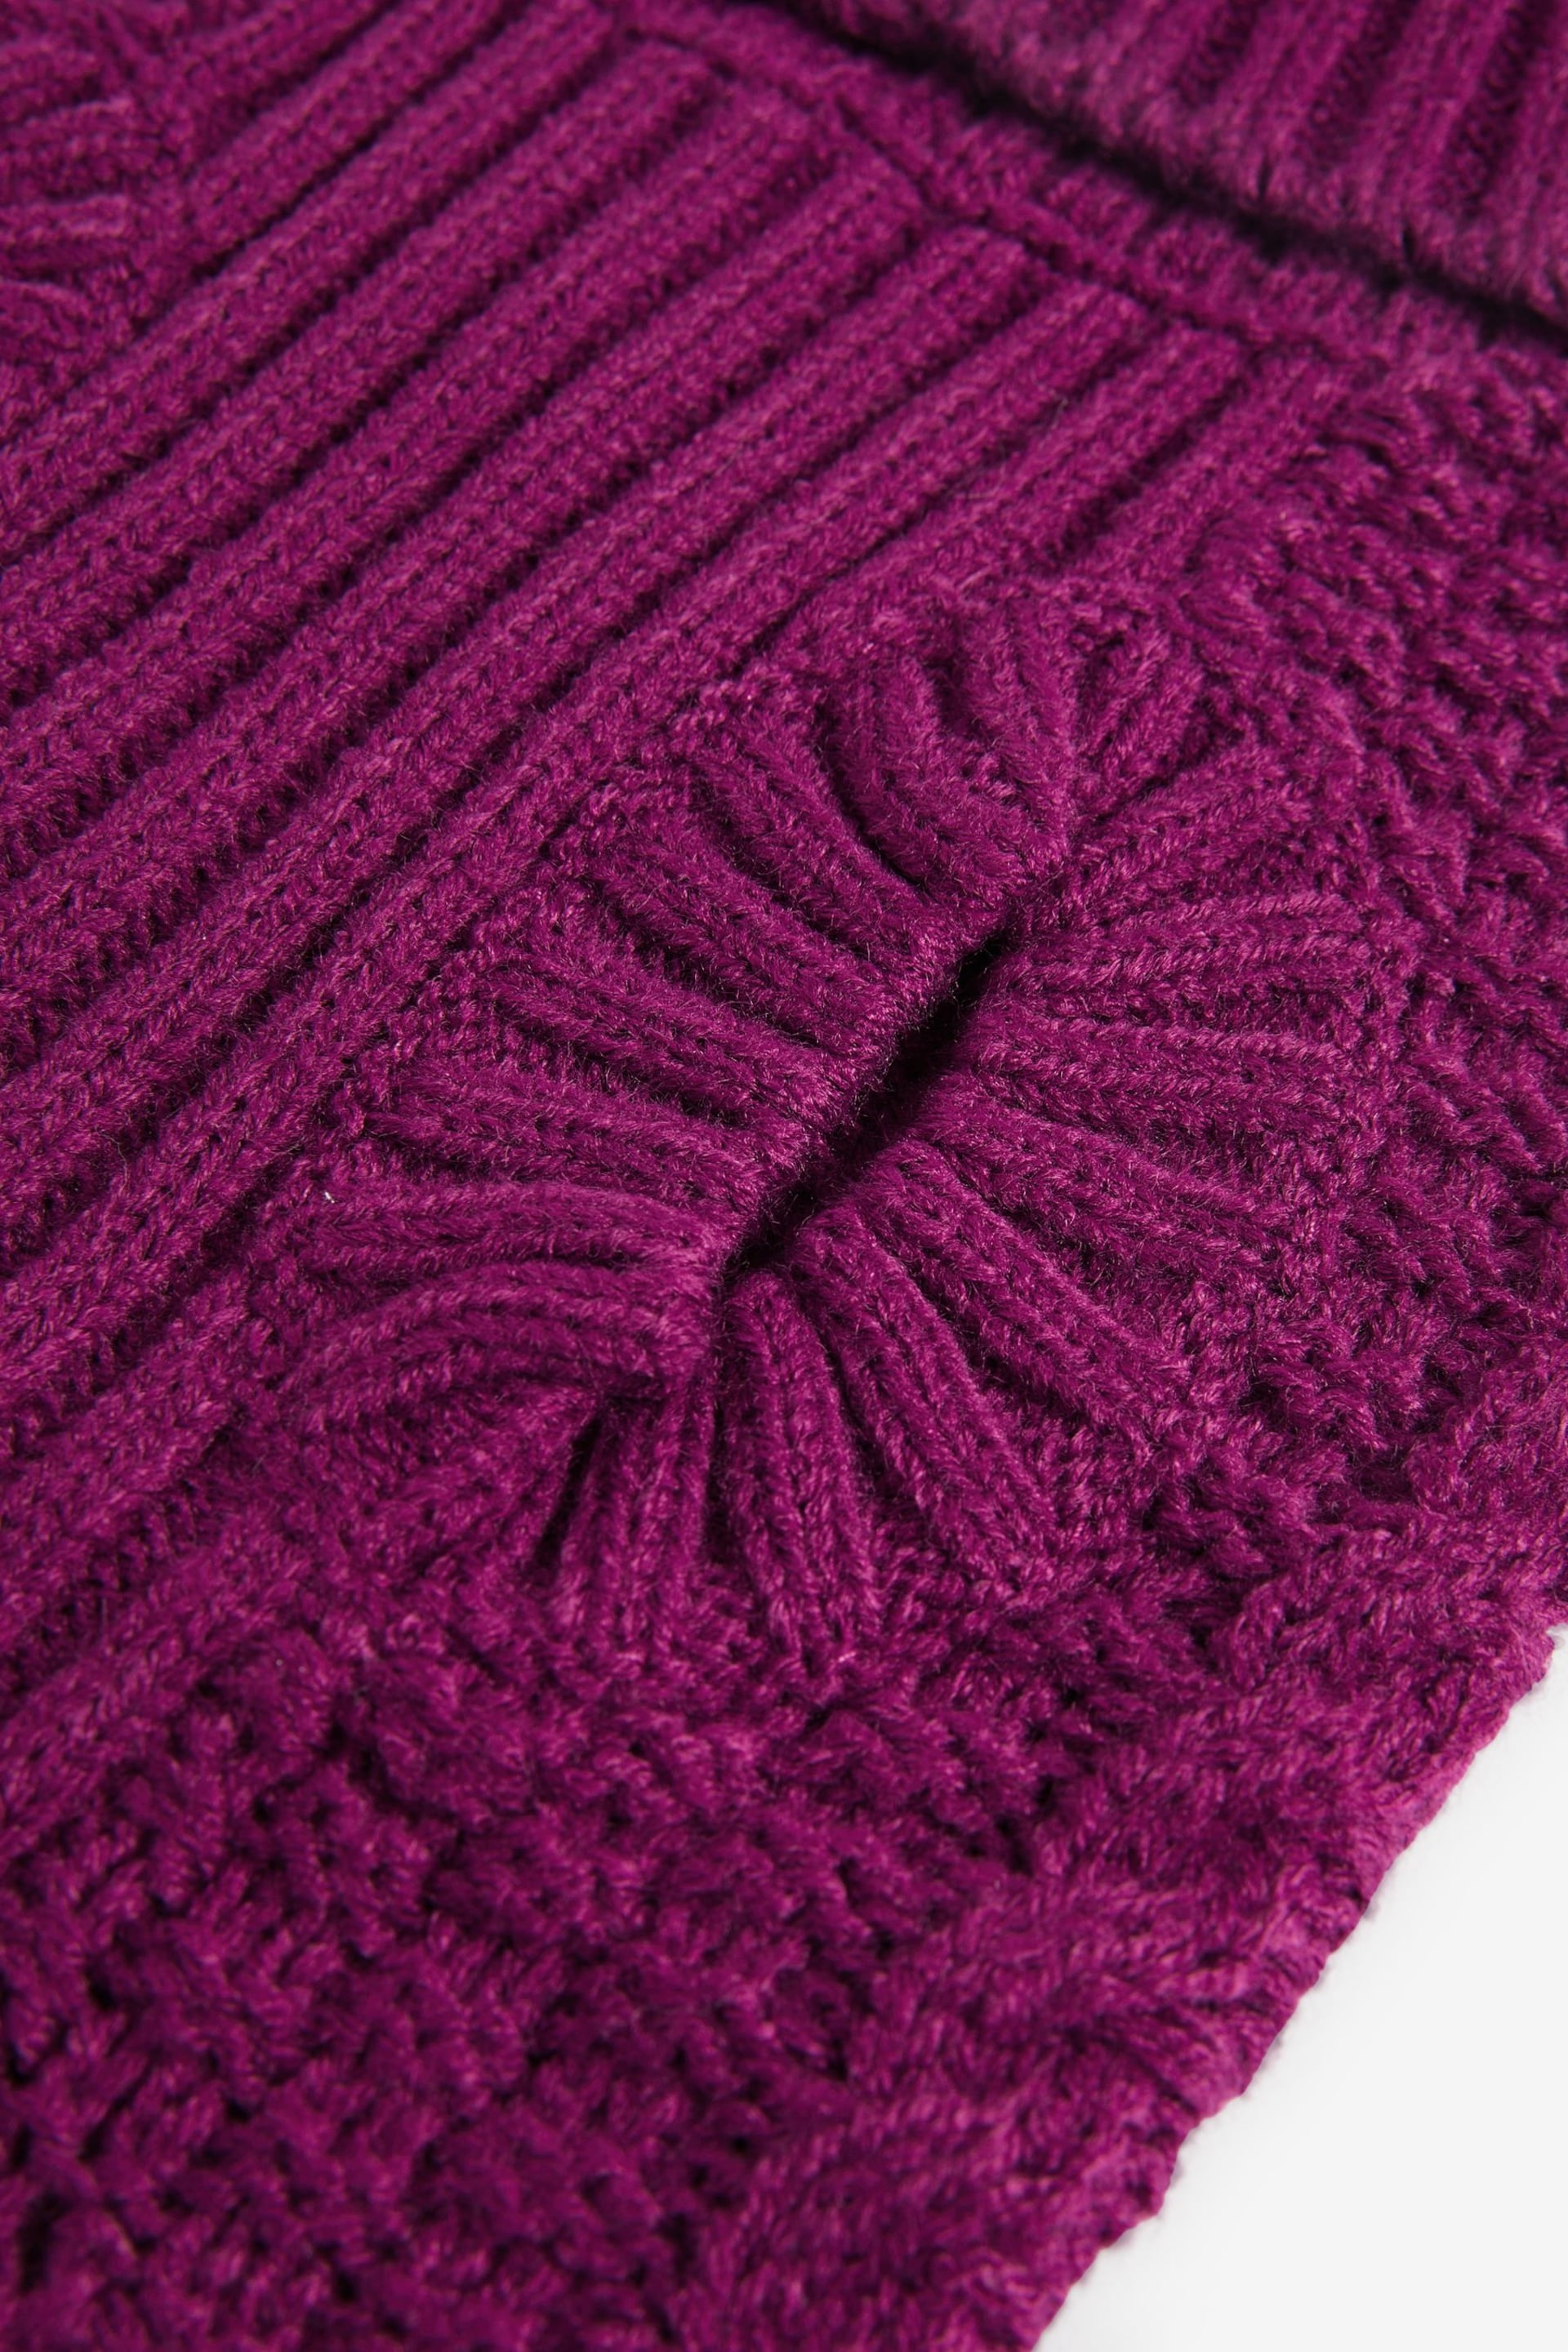 Pink Cable Stitch Dog Jumper - Image 9 of 9